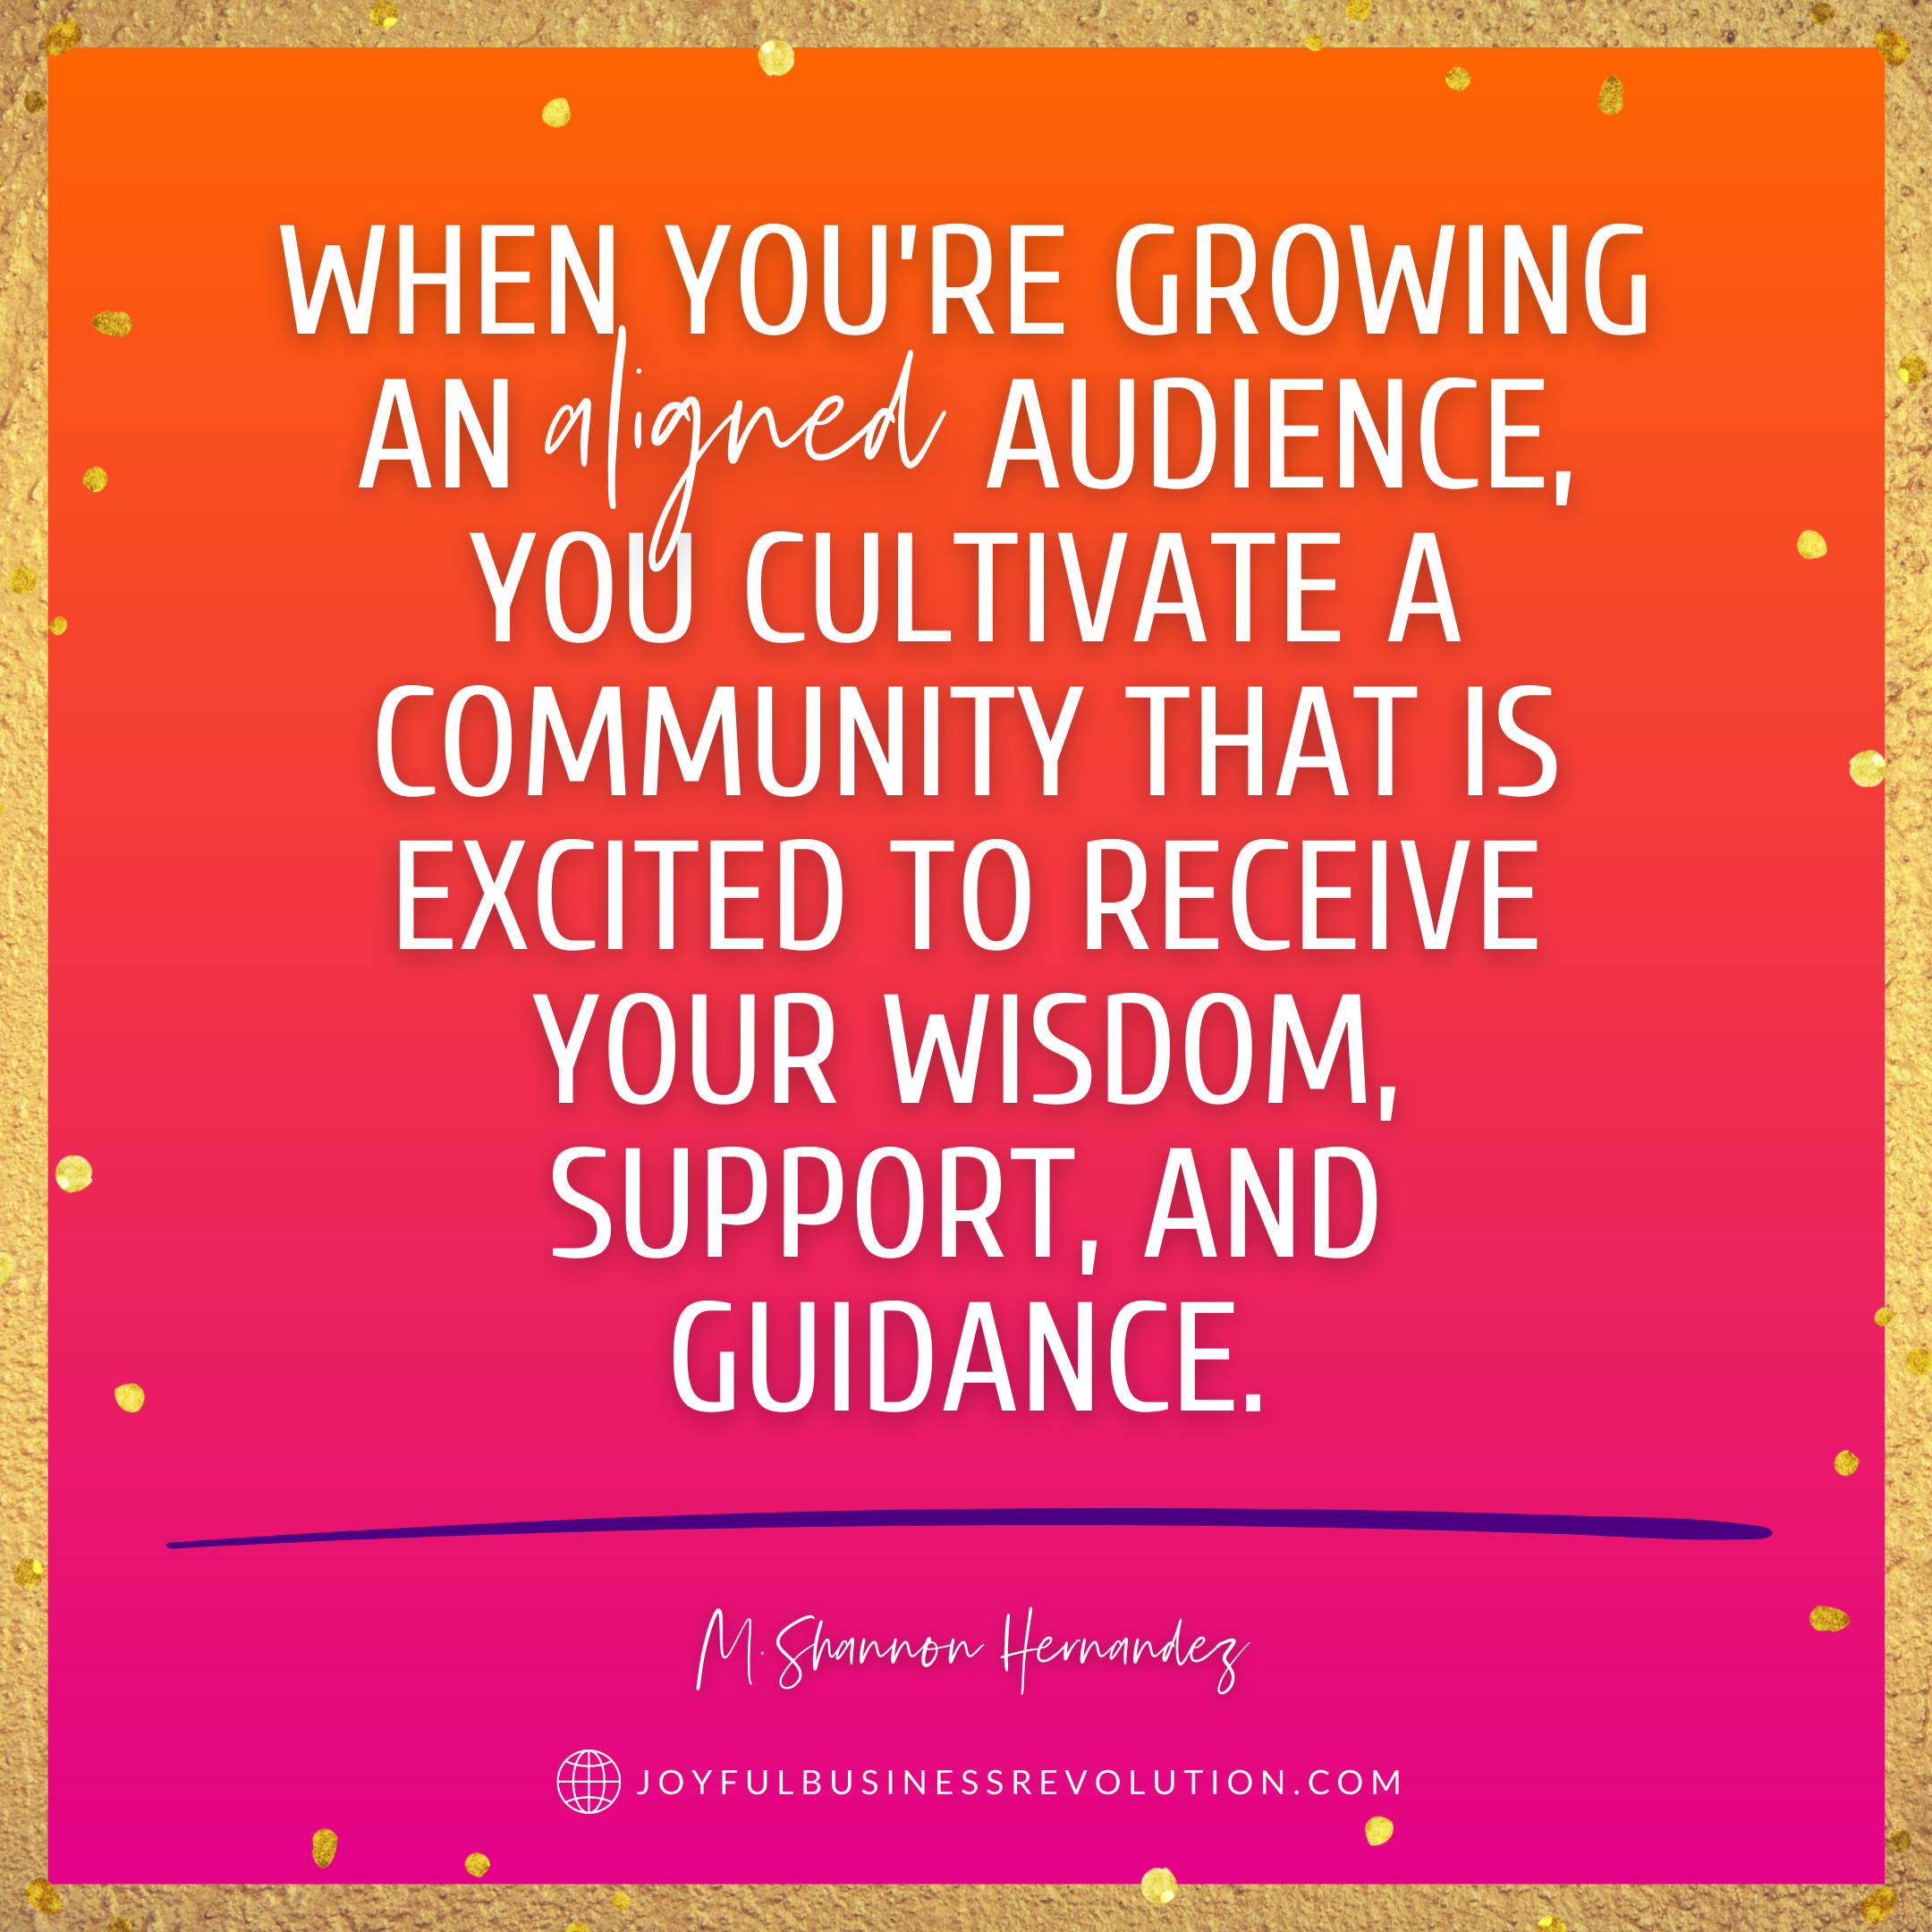 when you’re growing an aligned audience, you cultivate a community that is excited to receive your wisdom, support, and guidance.